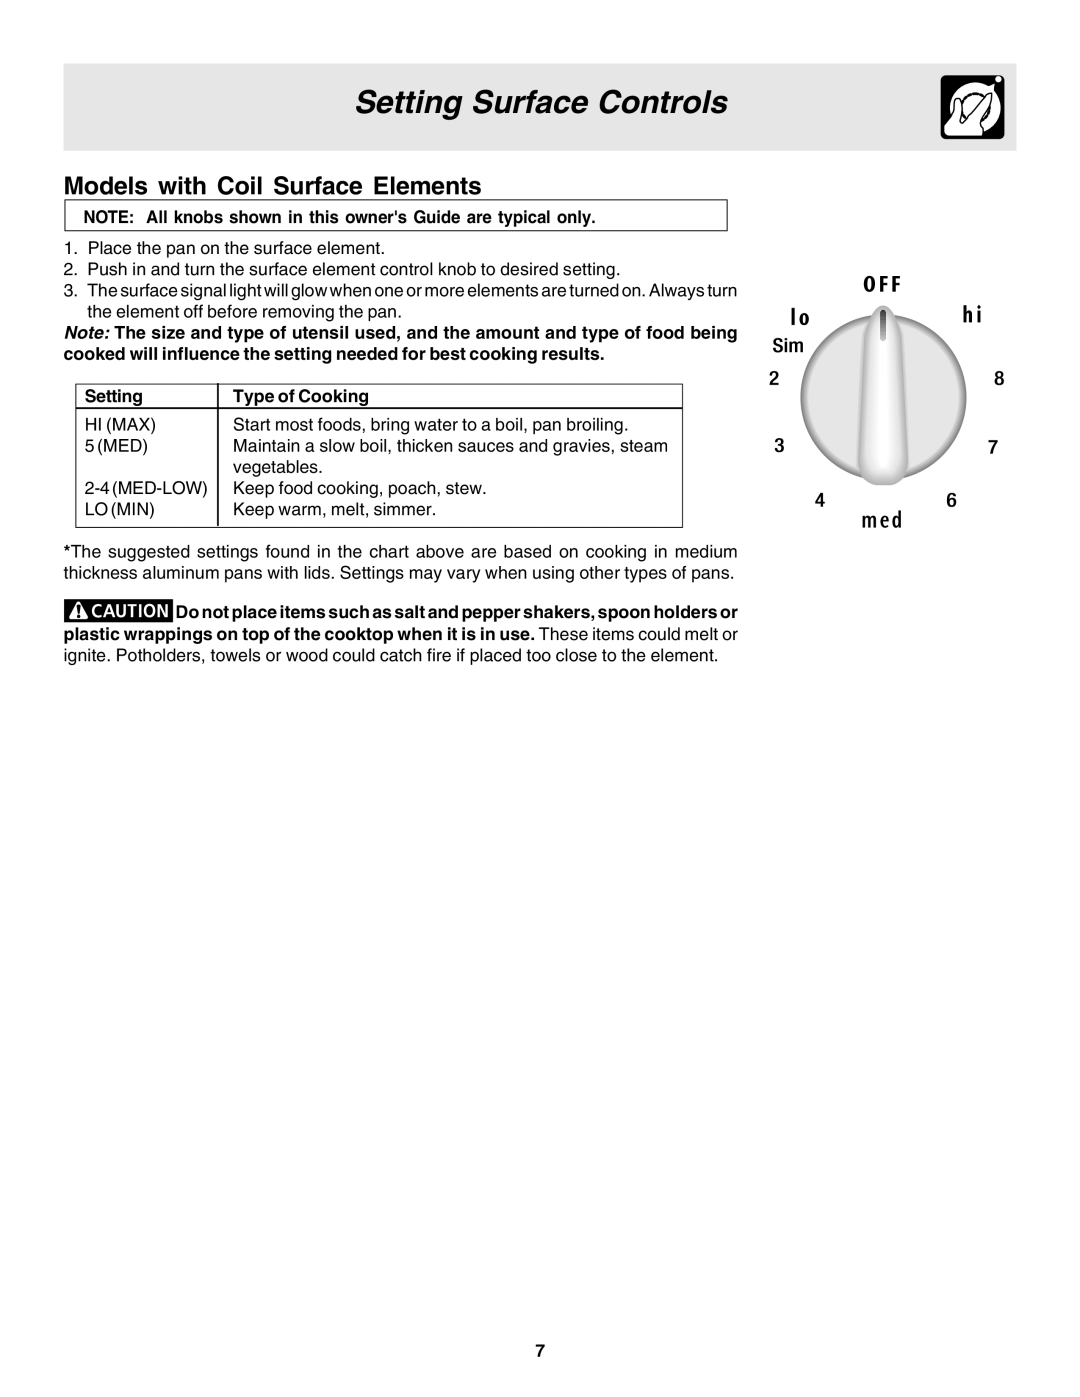 Frigidaire 318203860 warranty Setting Surface Controls, Models with Coil Surface Elements, Type of Cooking 